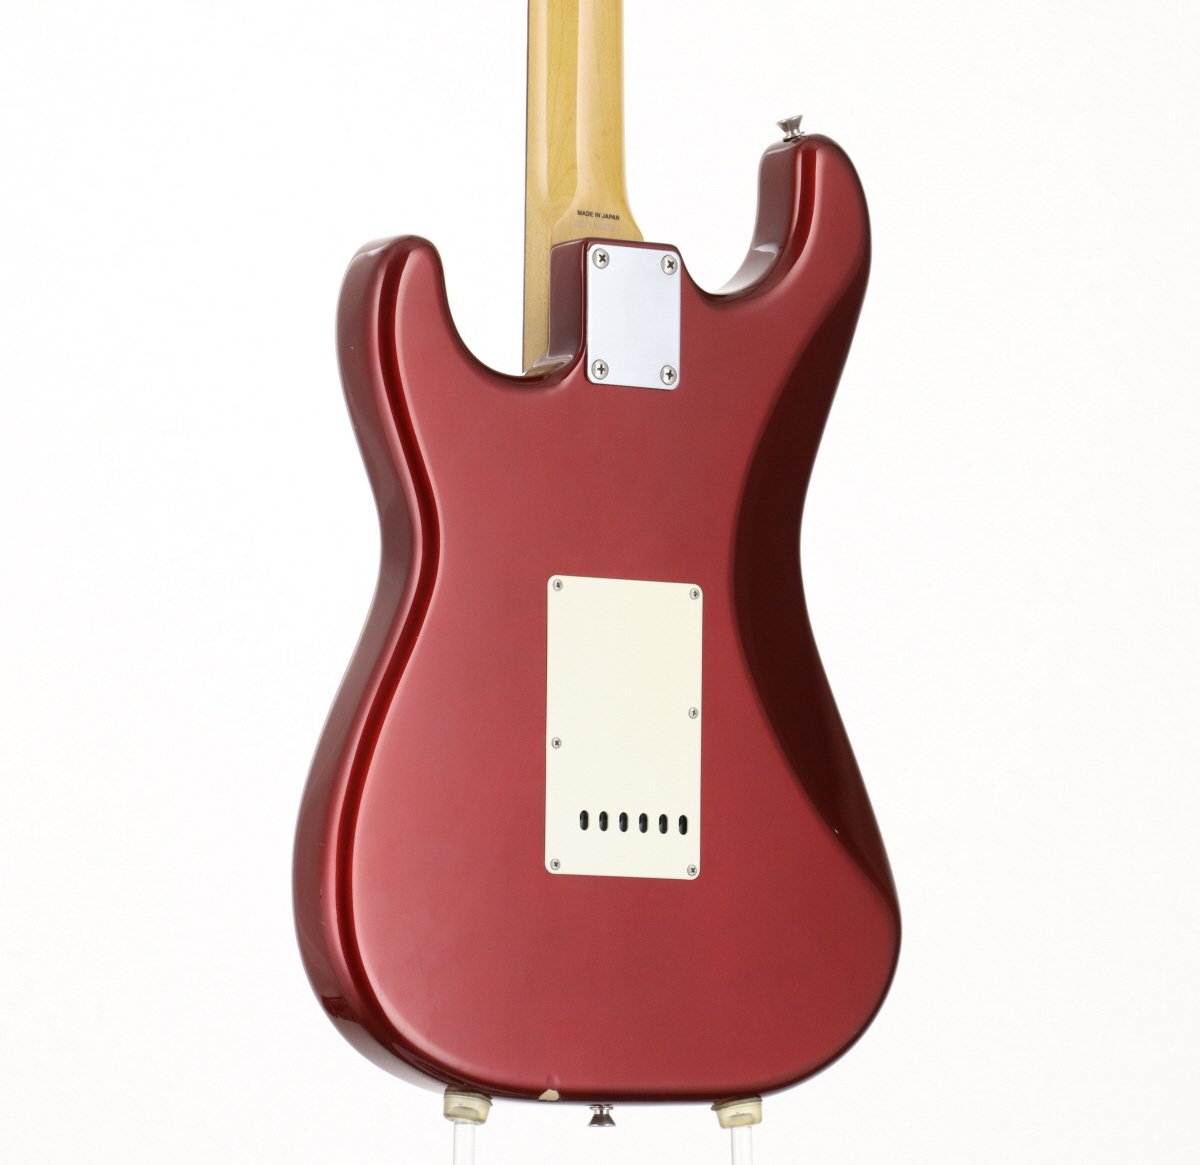 [SN T090747] USED Fender JAPAN / ST62 OCR Old Candy Apple Red 2007-2010 [09]